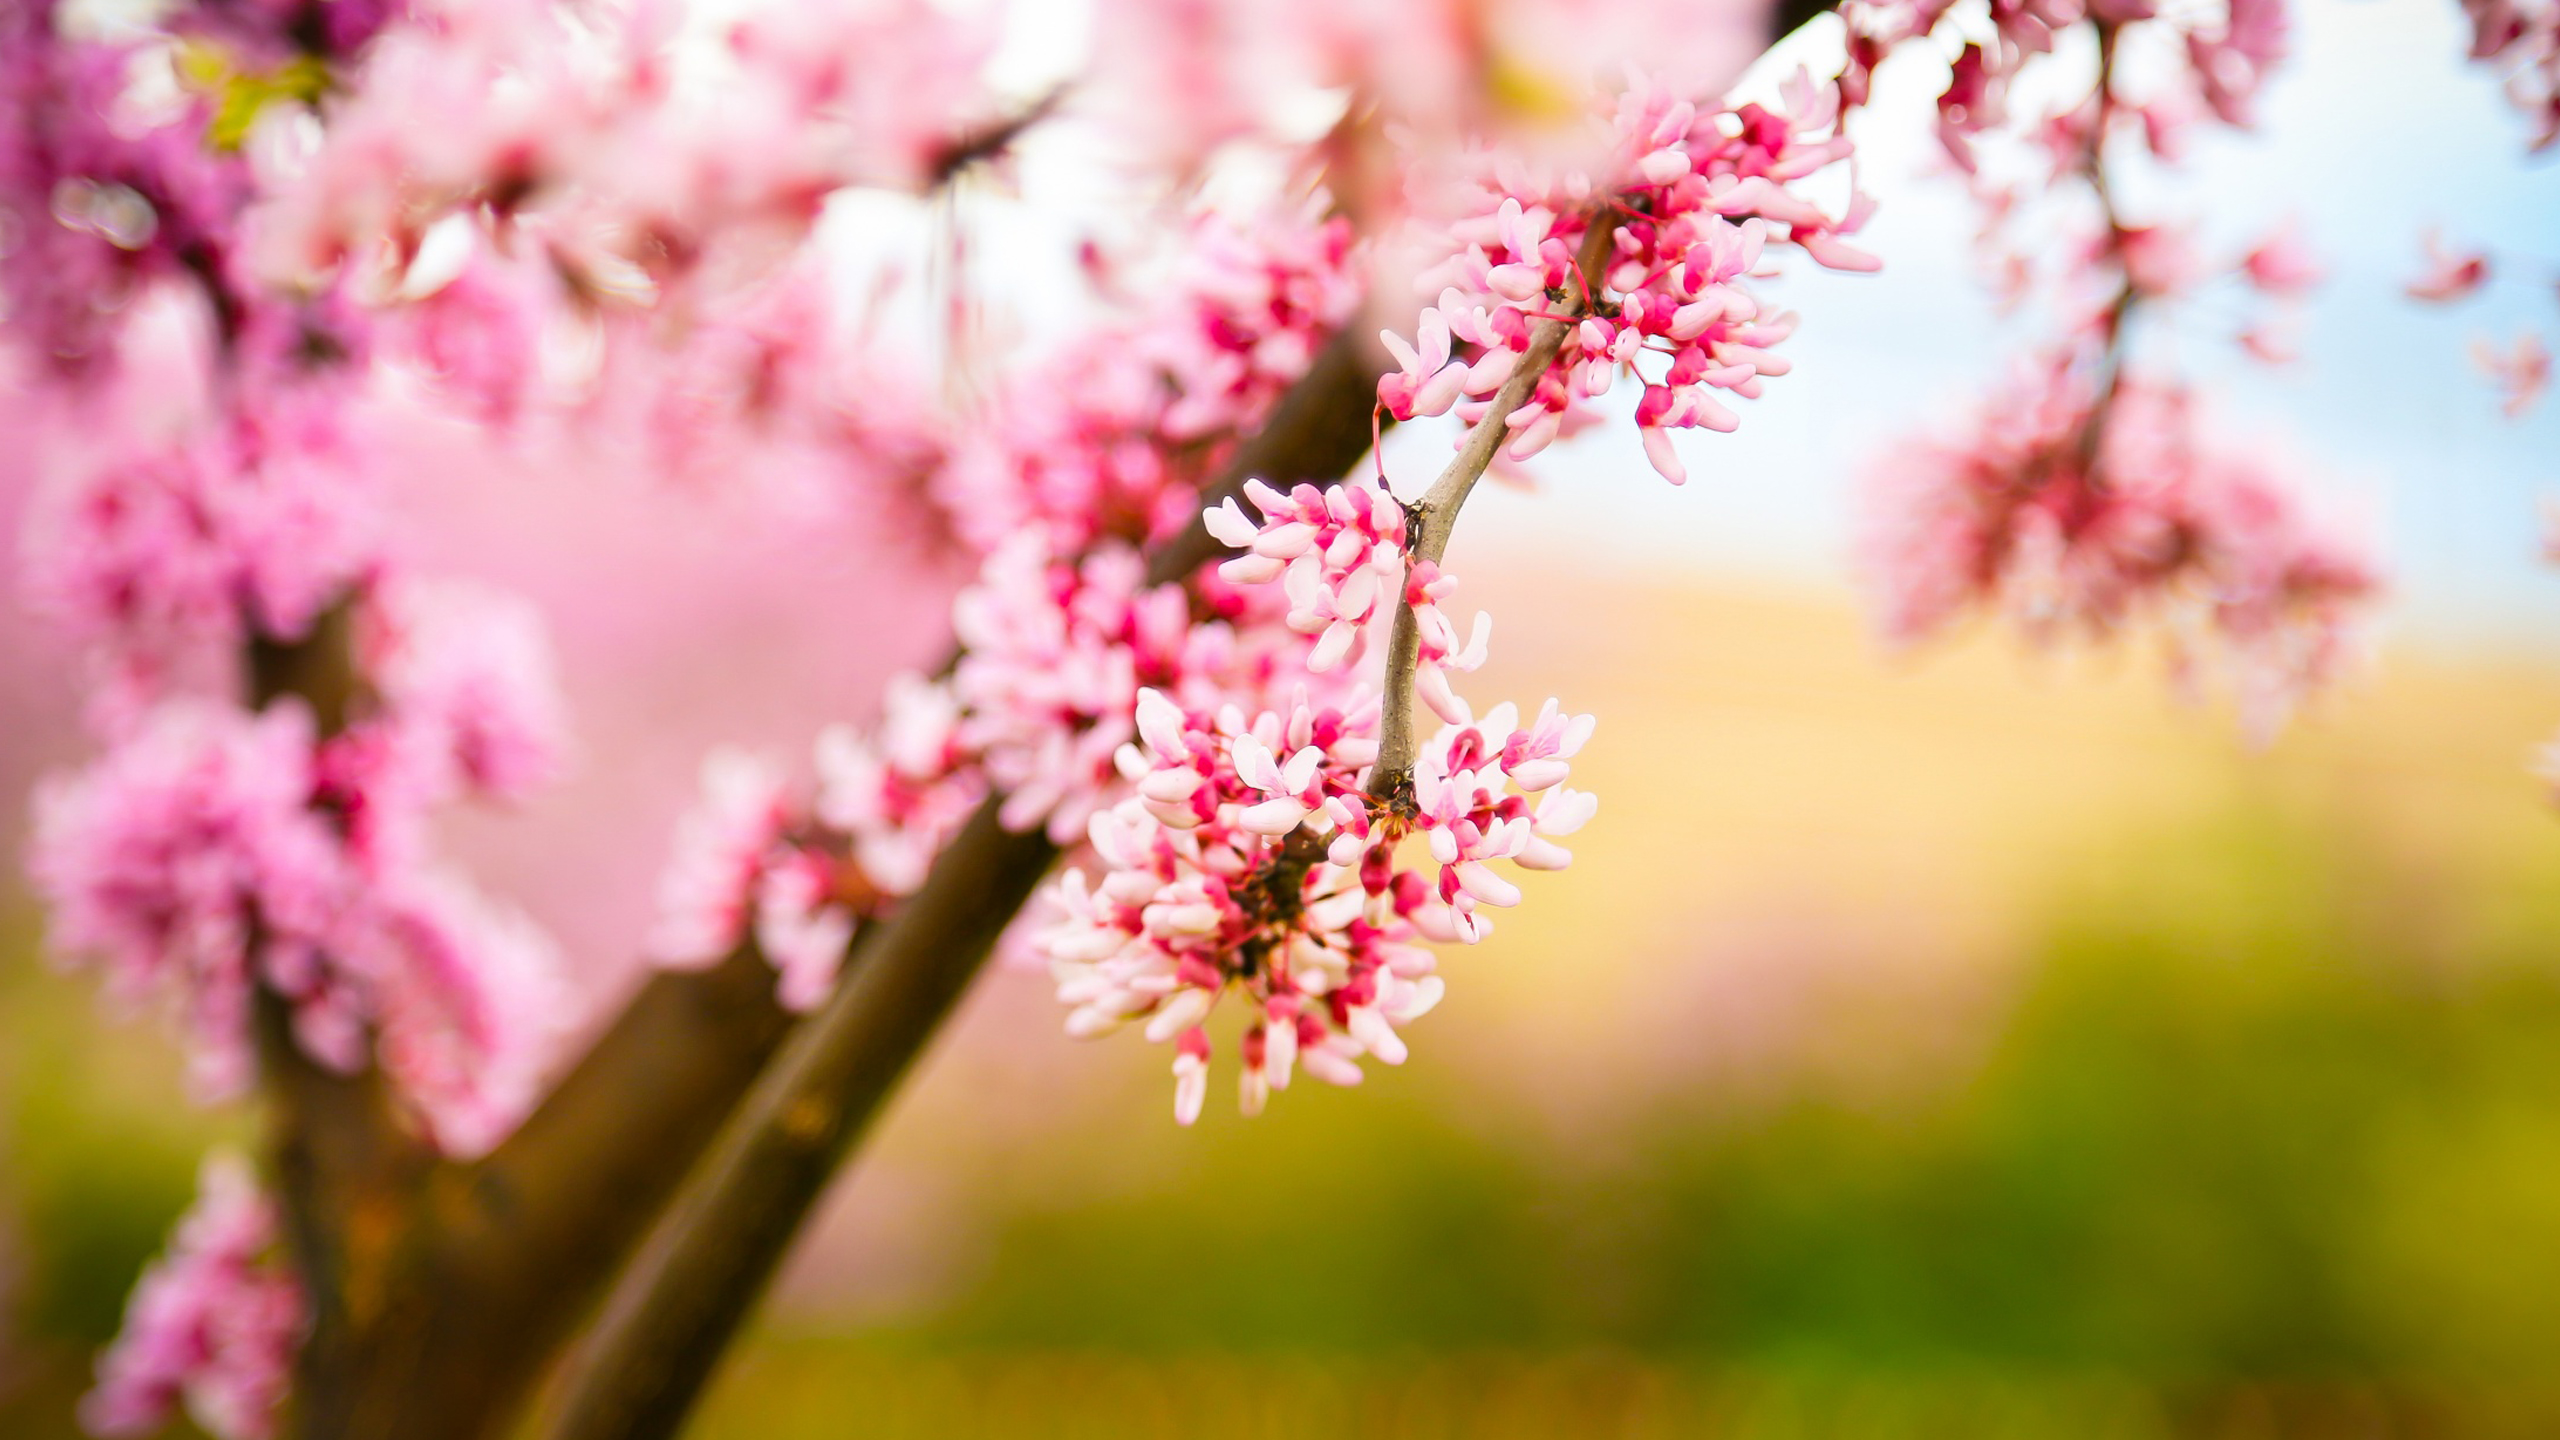 Pink Blossom Flowers Tree Branches In Blur Wallpaper HD Pink Aesthetic